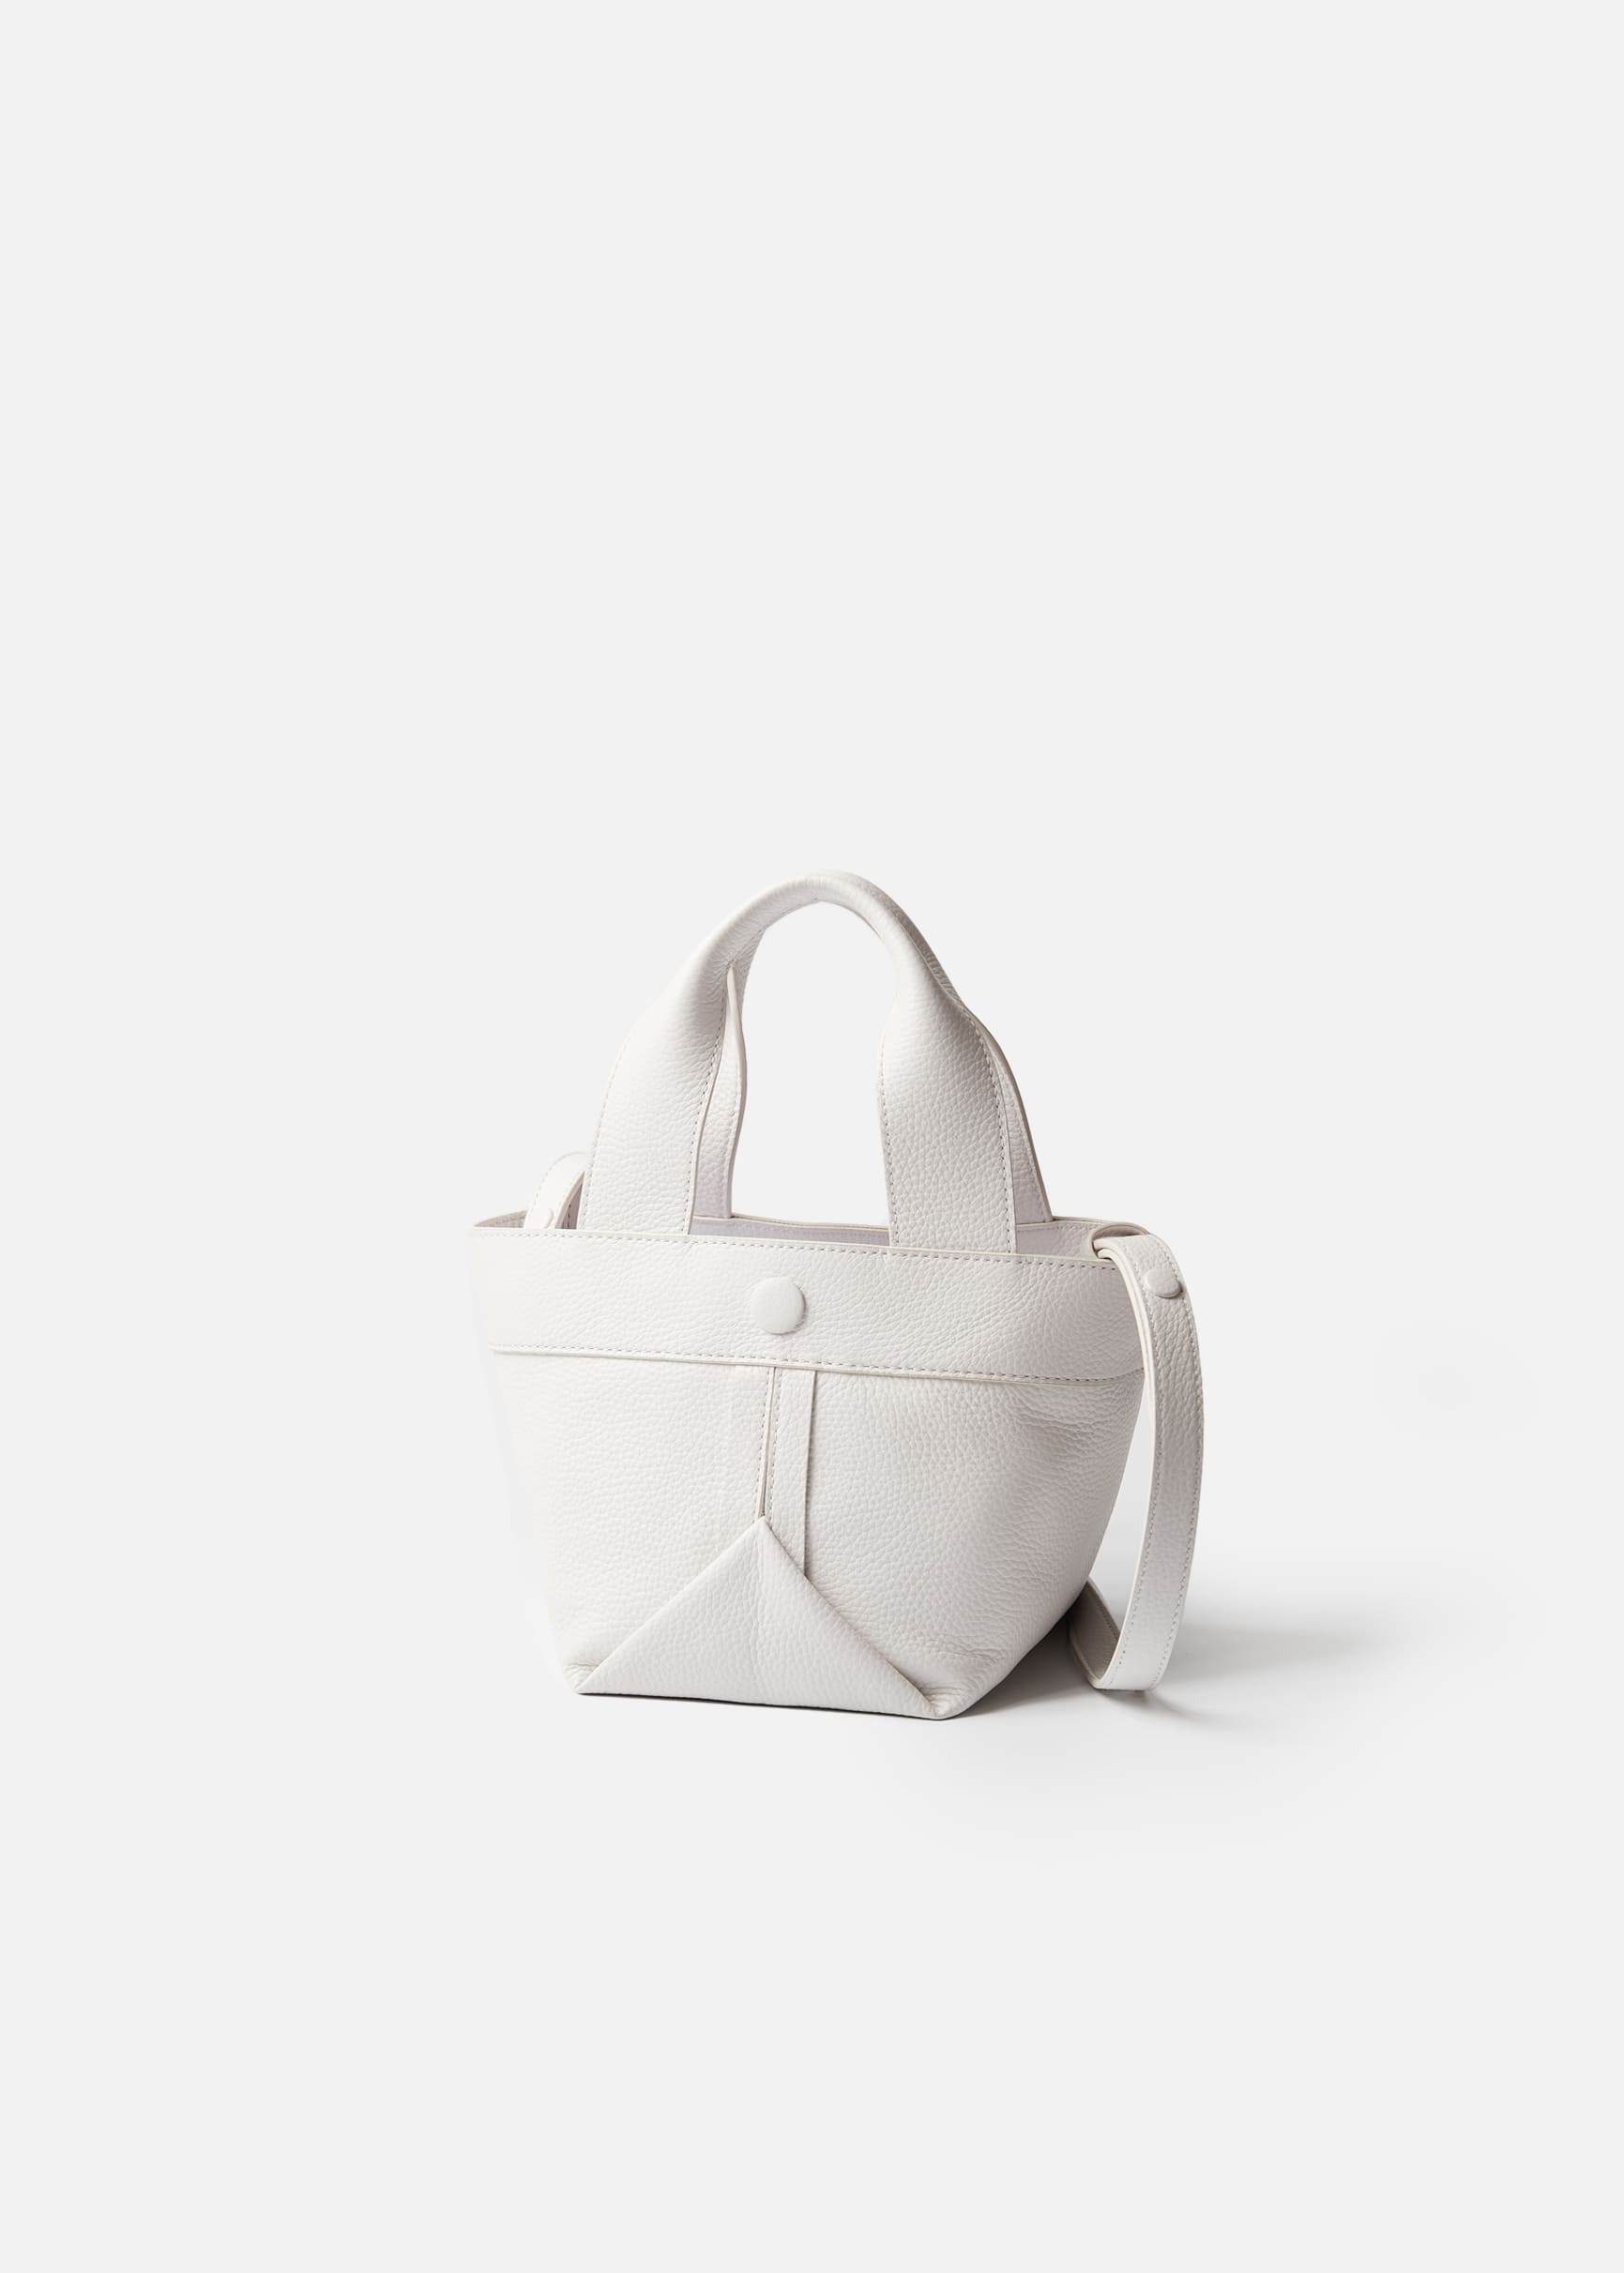 Gusset small pebble leather tote in white